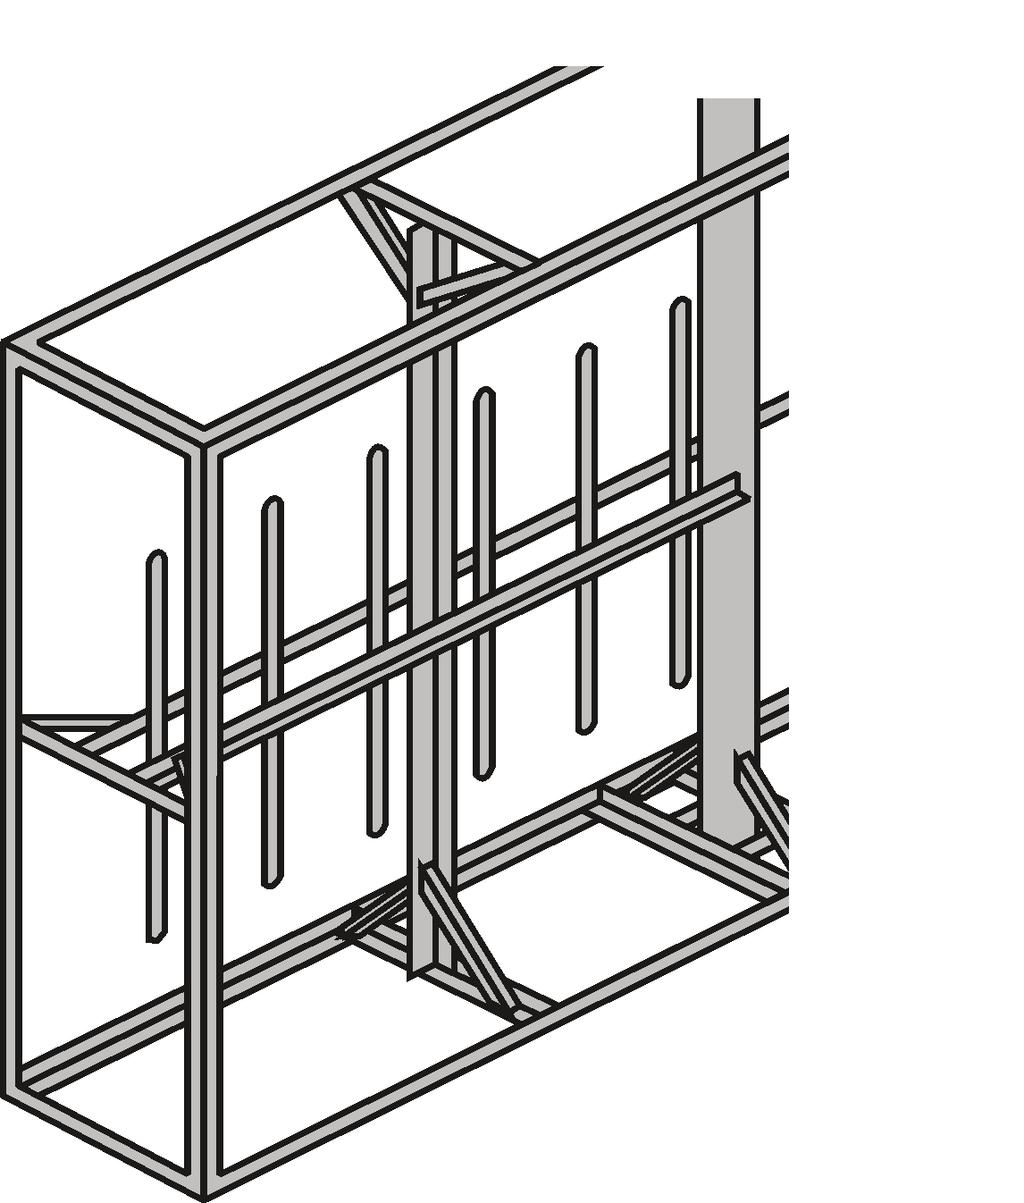 STRUCTURAL STEEL SUPPORT MEMBERS FOR TYPICAL STEEL ANGLE FRAME CONSTRUCTION: The angle Iron frame illustration shows the typical knee braces that are required at the top